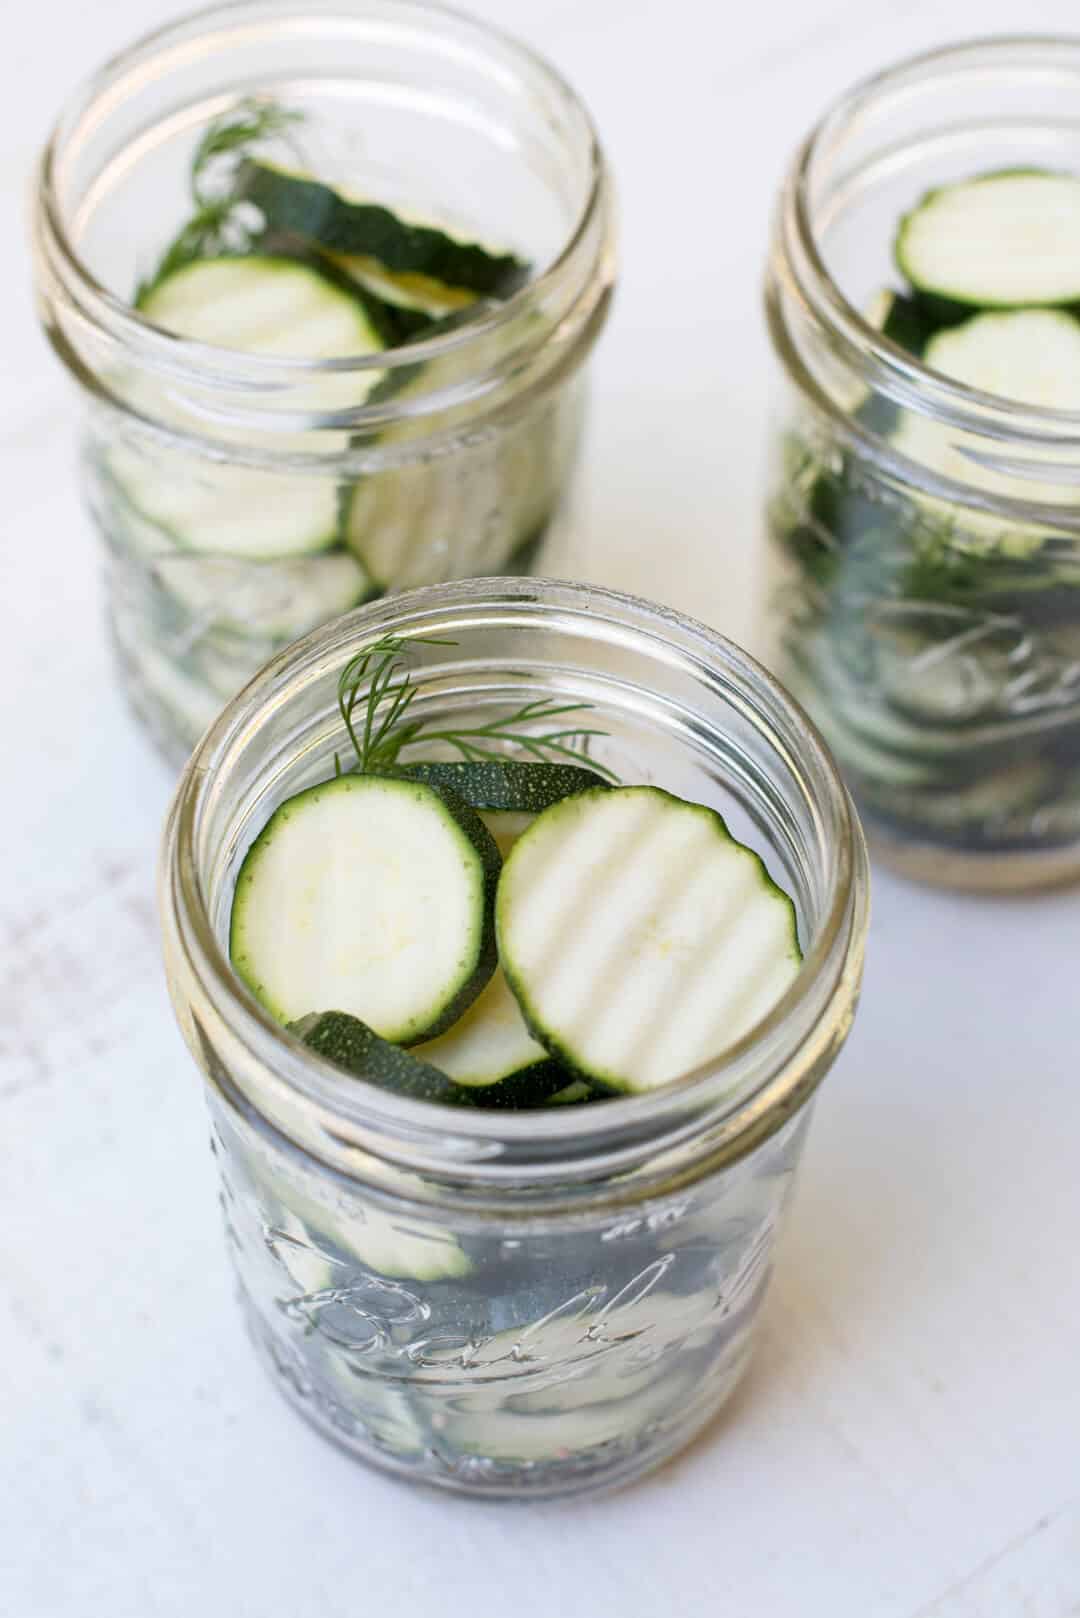 Slices of zucchini and sprigs of fresh dill are placed in the mason jars.